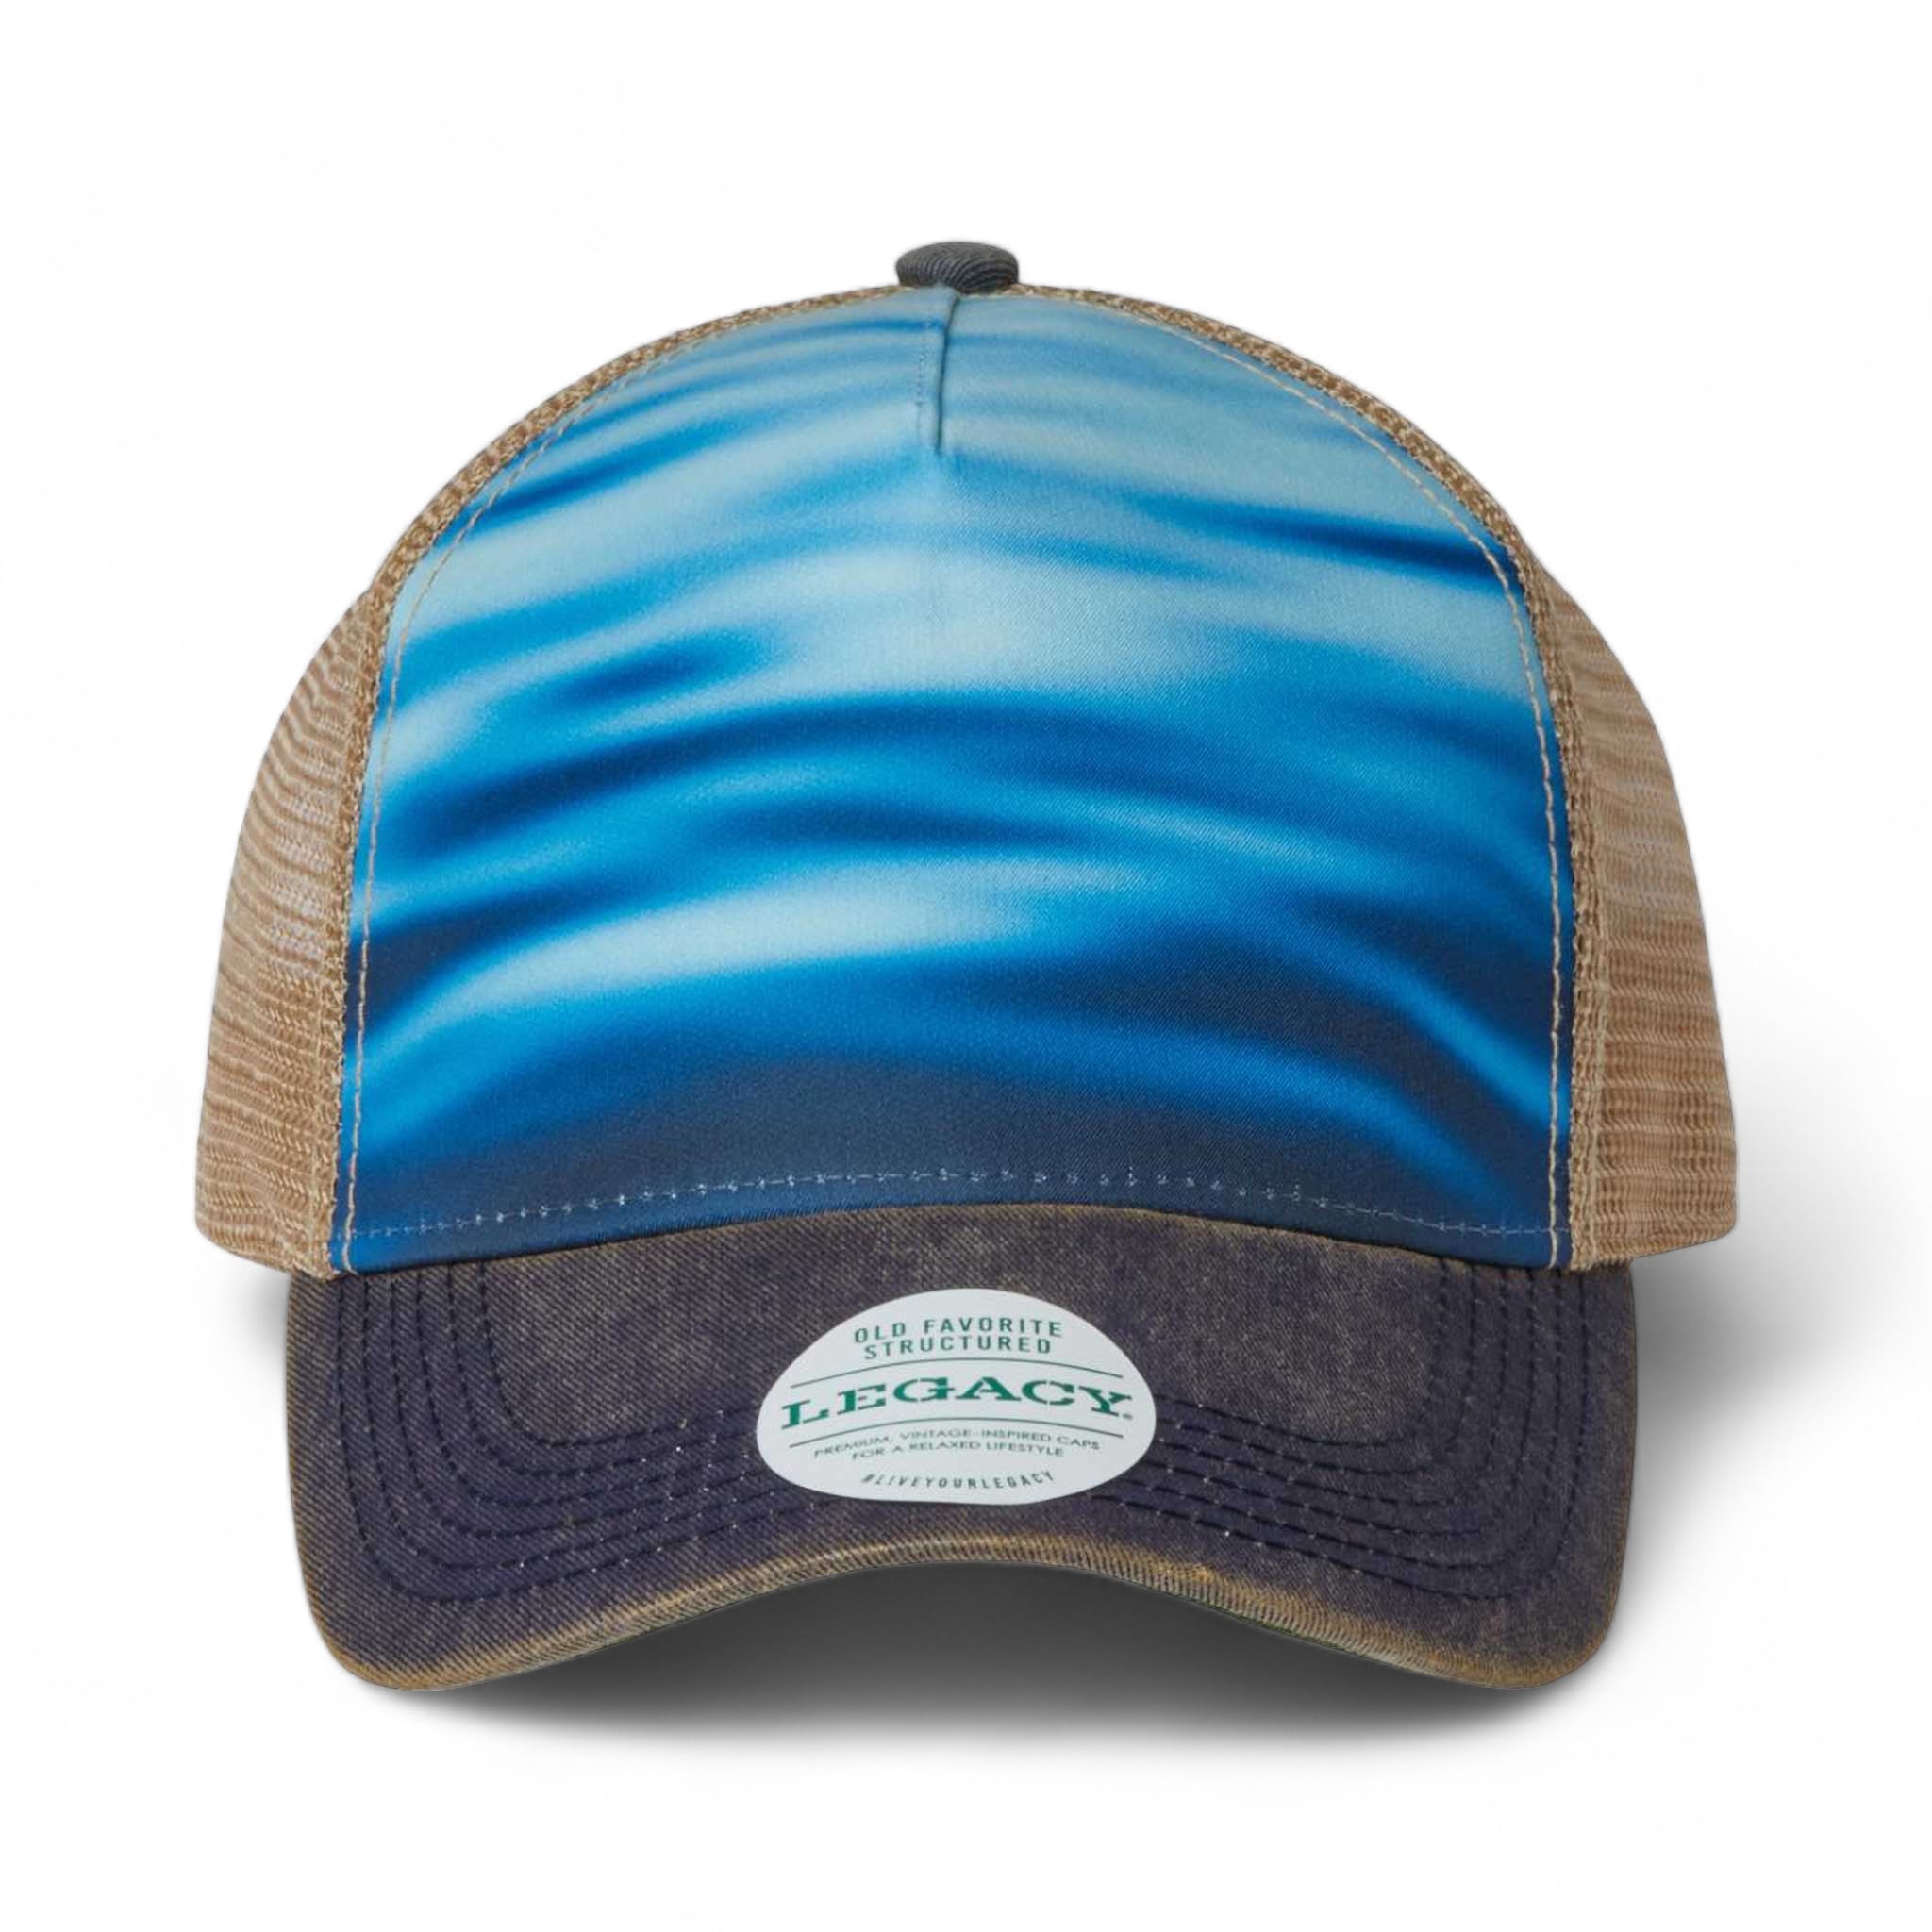 Front view of LEGACY OFAFP custom hat in calm waters, navy and khaki